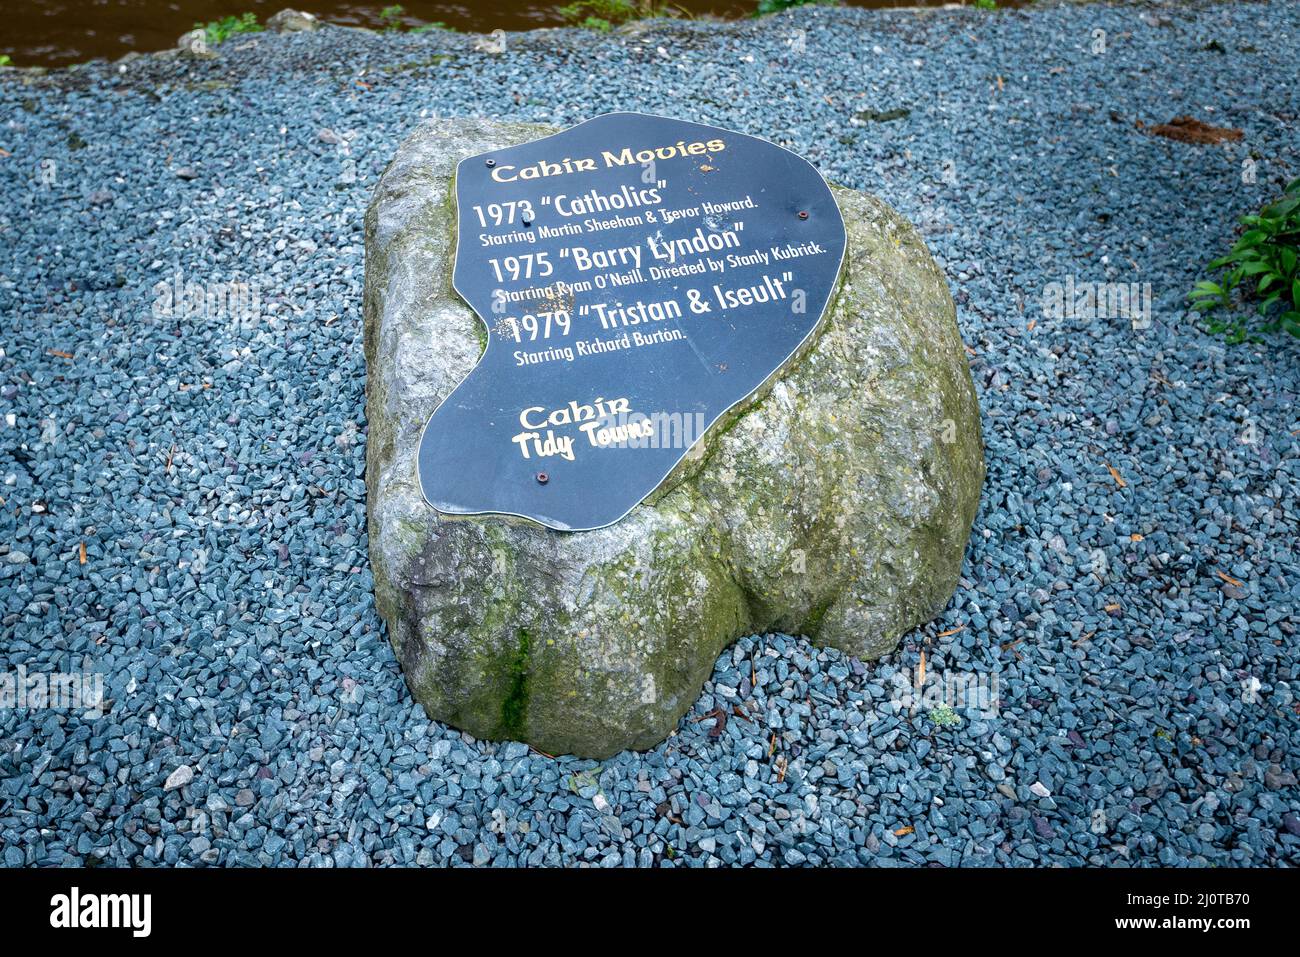 Stone plaque at Cahir Castle Ireland showing famous movies made at the site.  Stock Photo